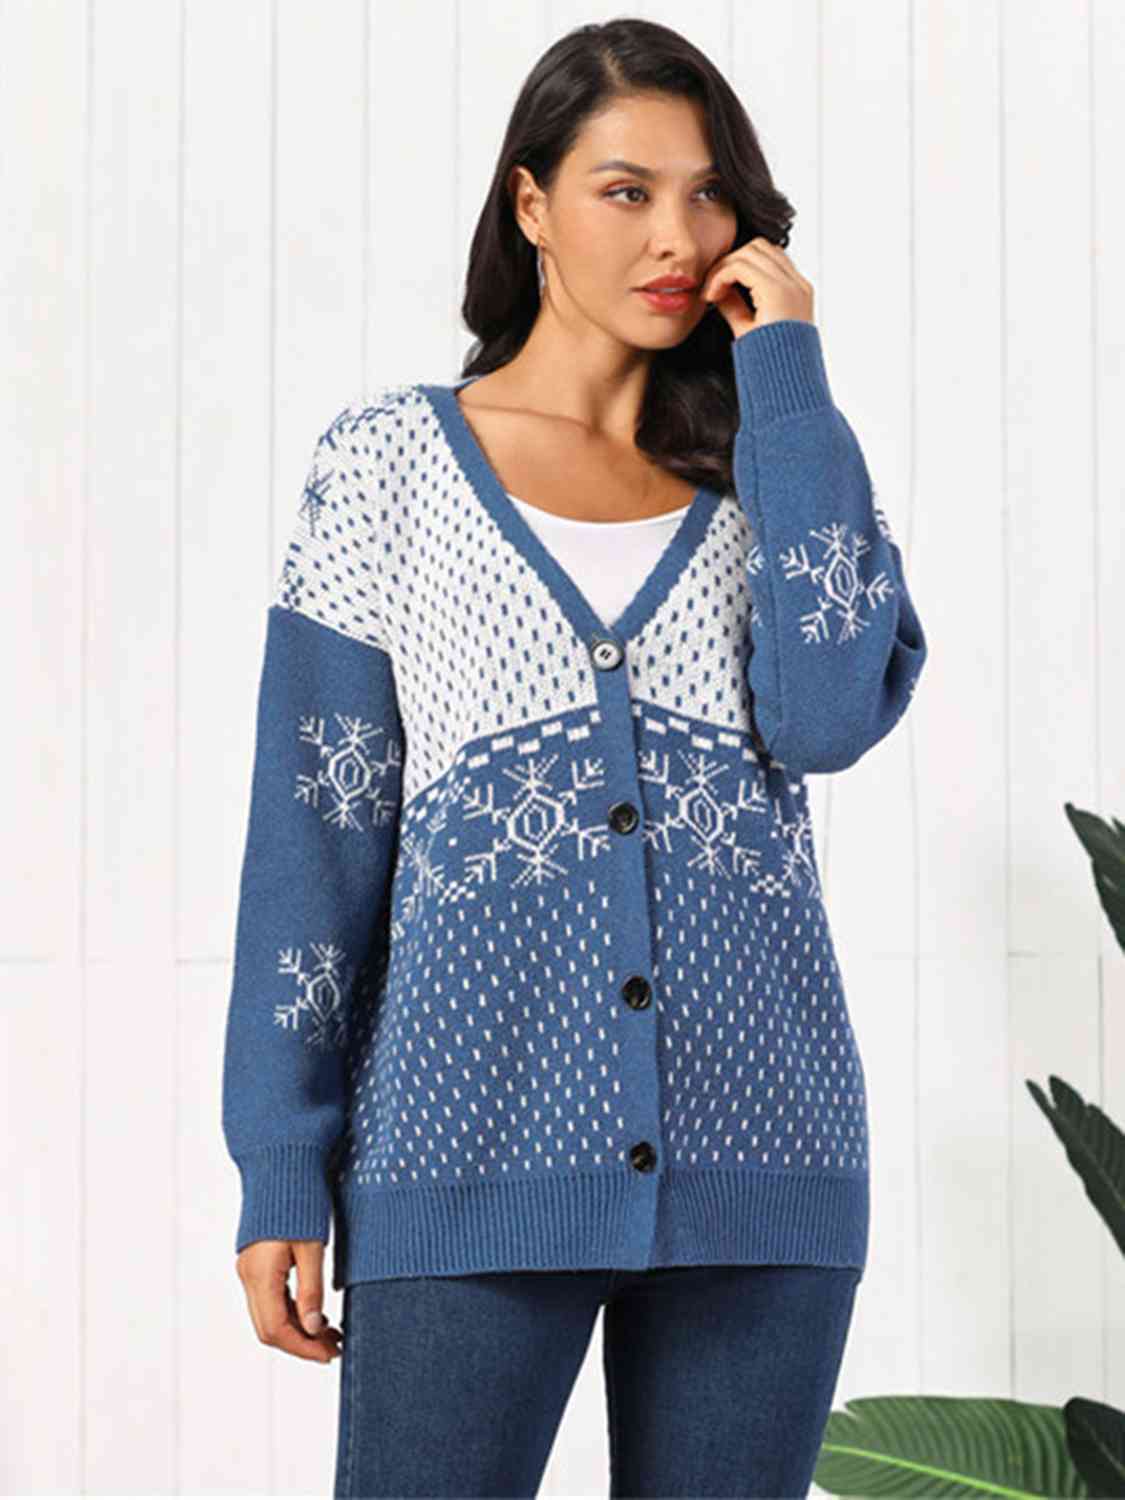 Snowflake Button Down Cardigan - Dusty Blue / S - Women’s Clothing & Accessories - Shirts & Tops - 5 - 2024